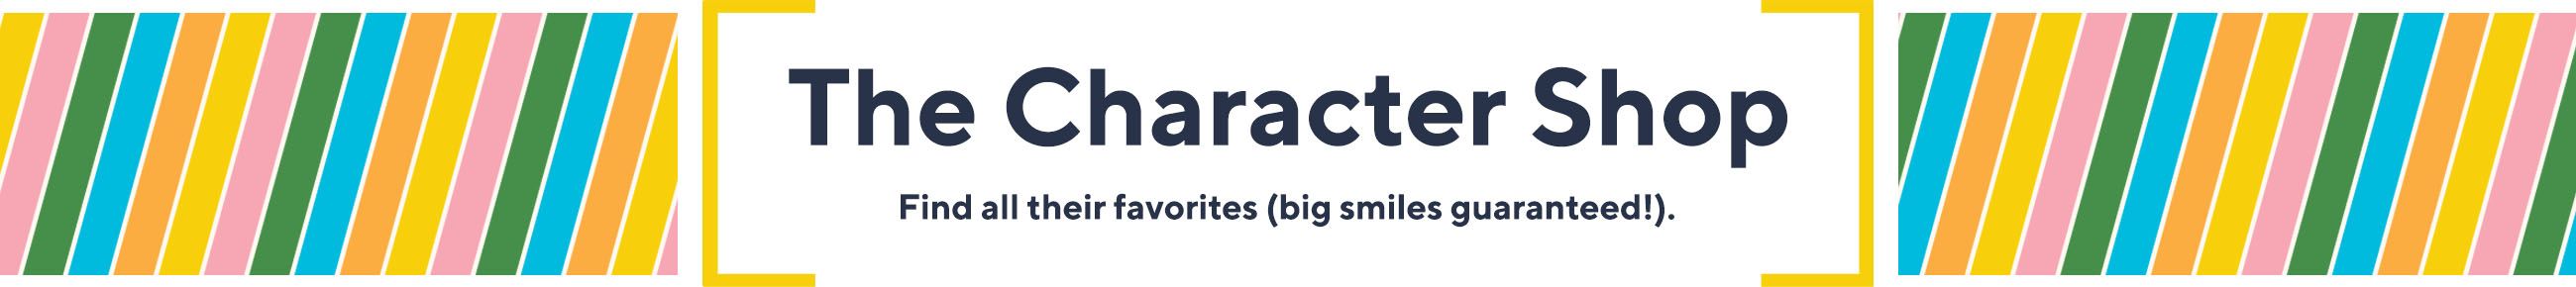 The Character Shop: Find all their favorites (big smiles guaranteed!). 